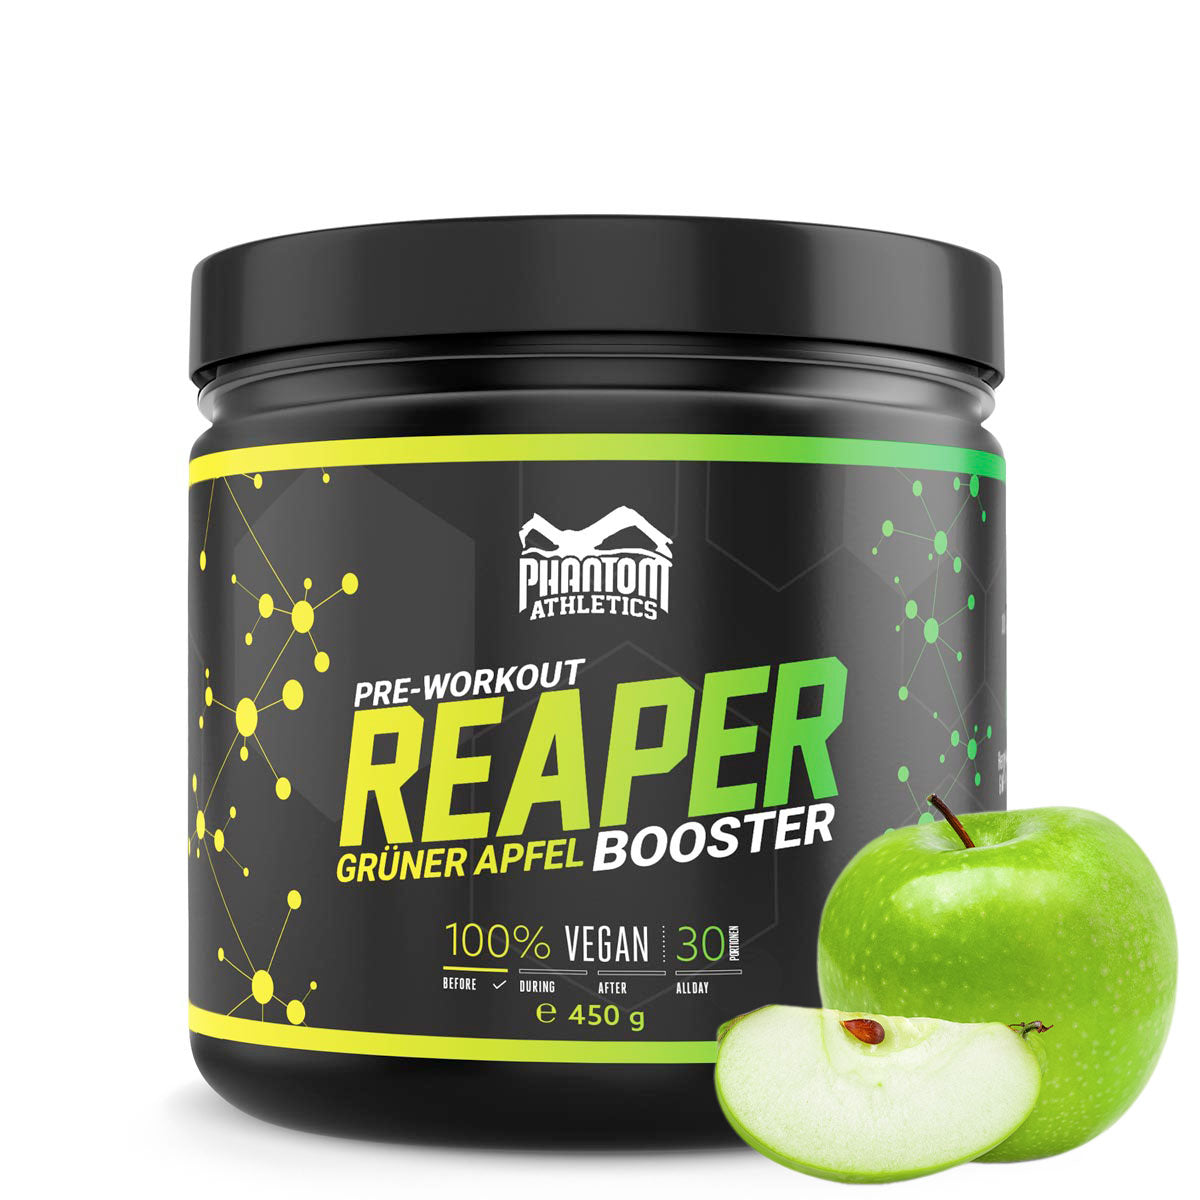 The Phantom REAPER pre-workout booster for martial arts. More energy and focus in training and competition for real fighters. With a delicious apple taste and high-quality ingredients.